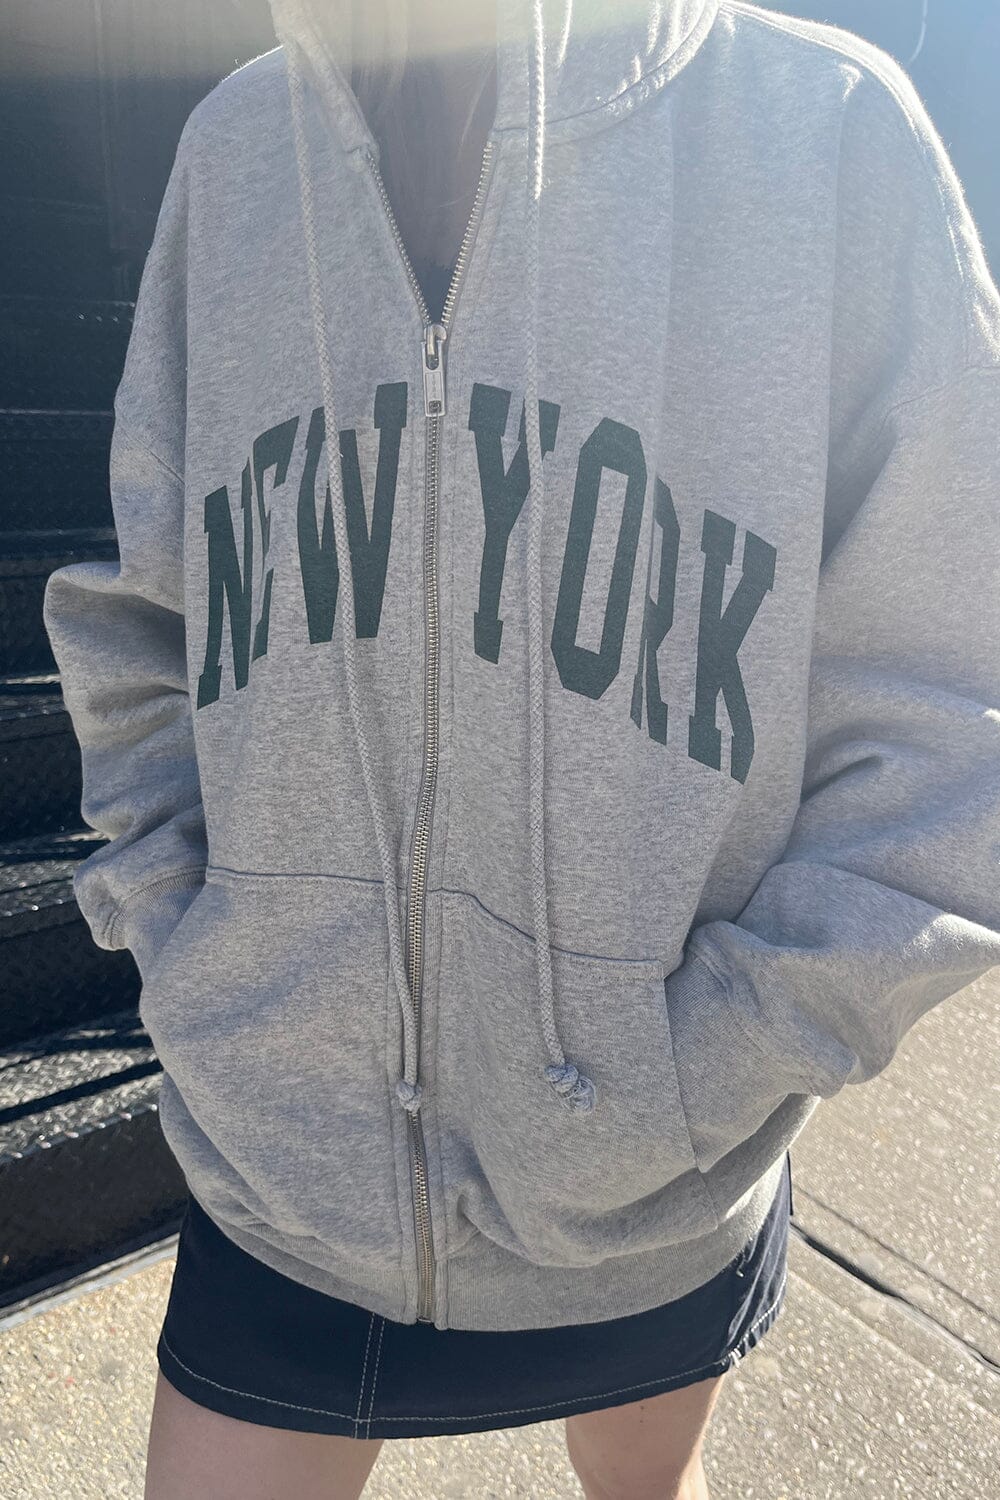 Brandy Melville oversized zip up Gray - $19 - From Talia